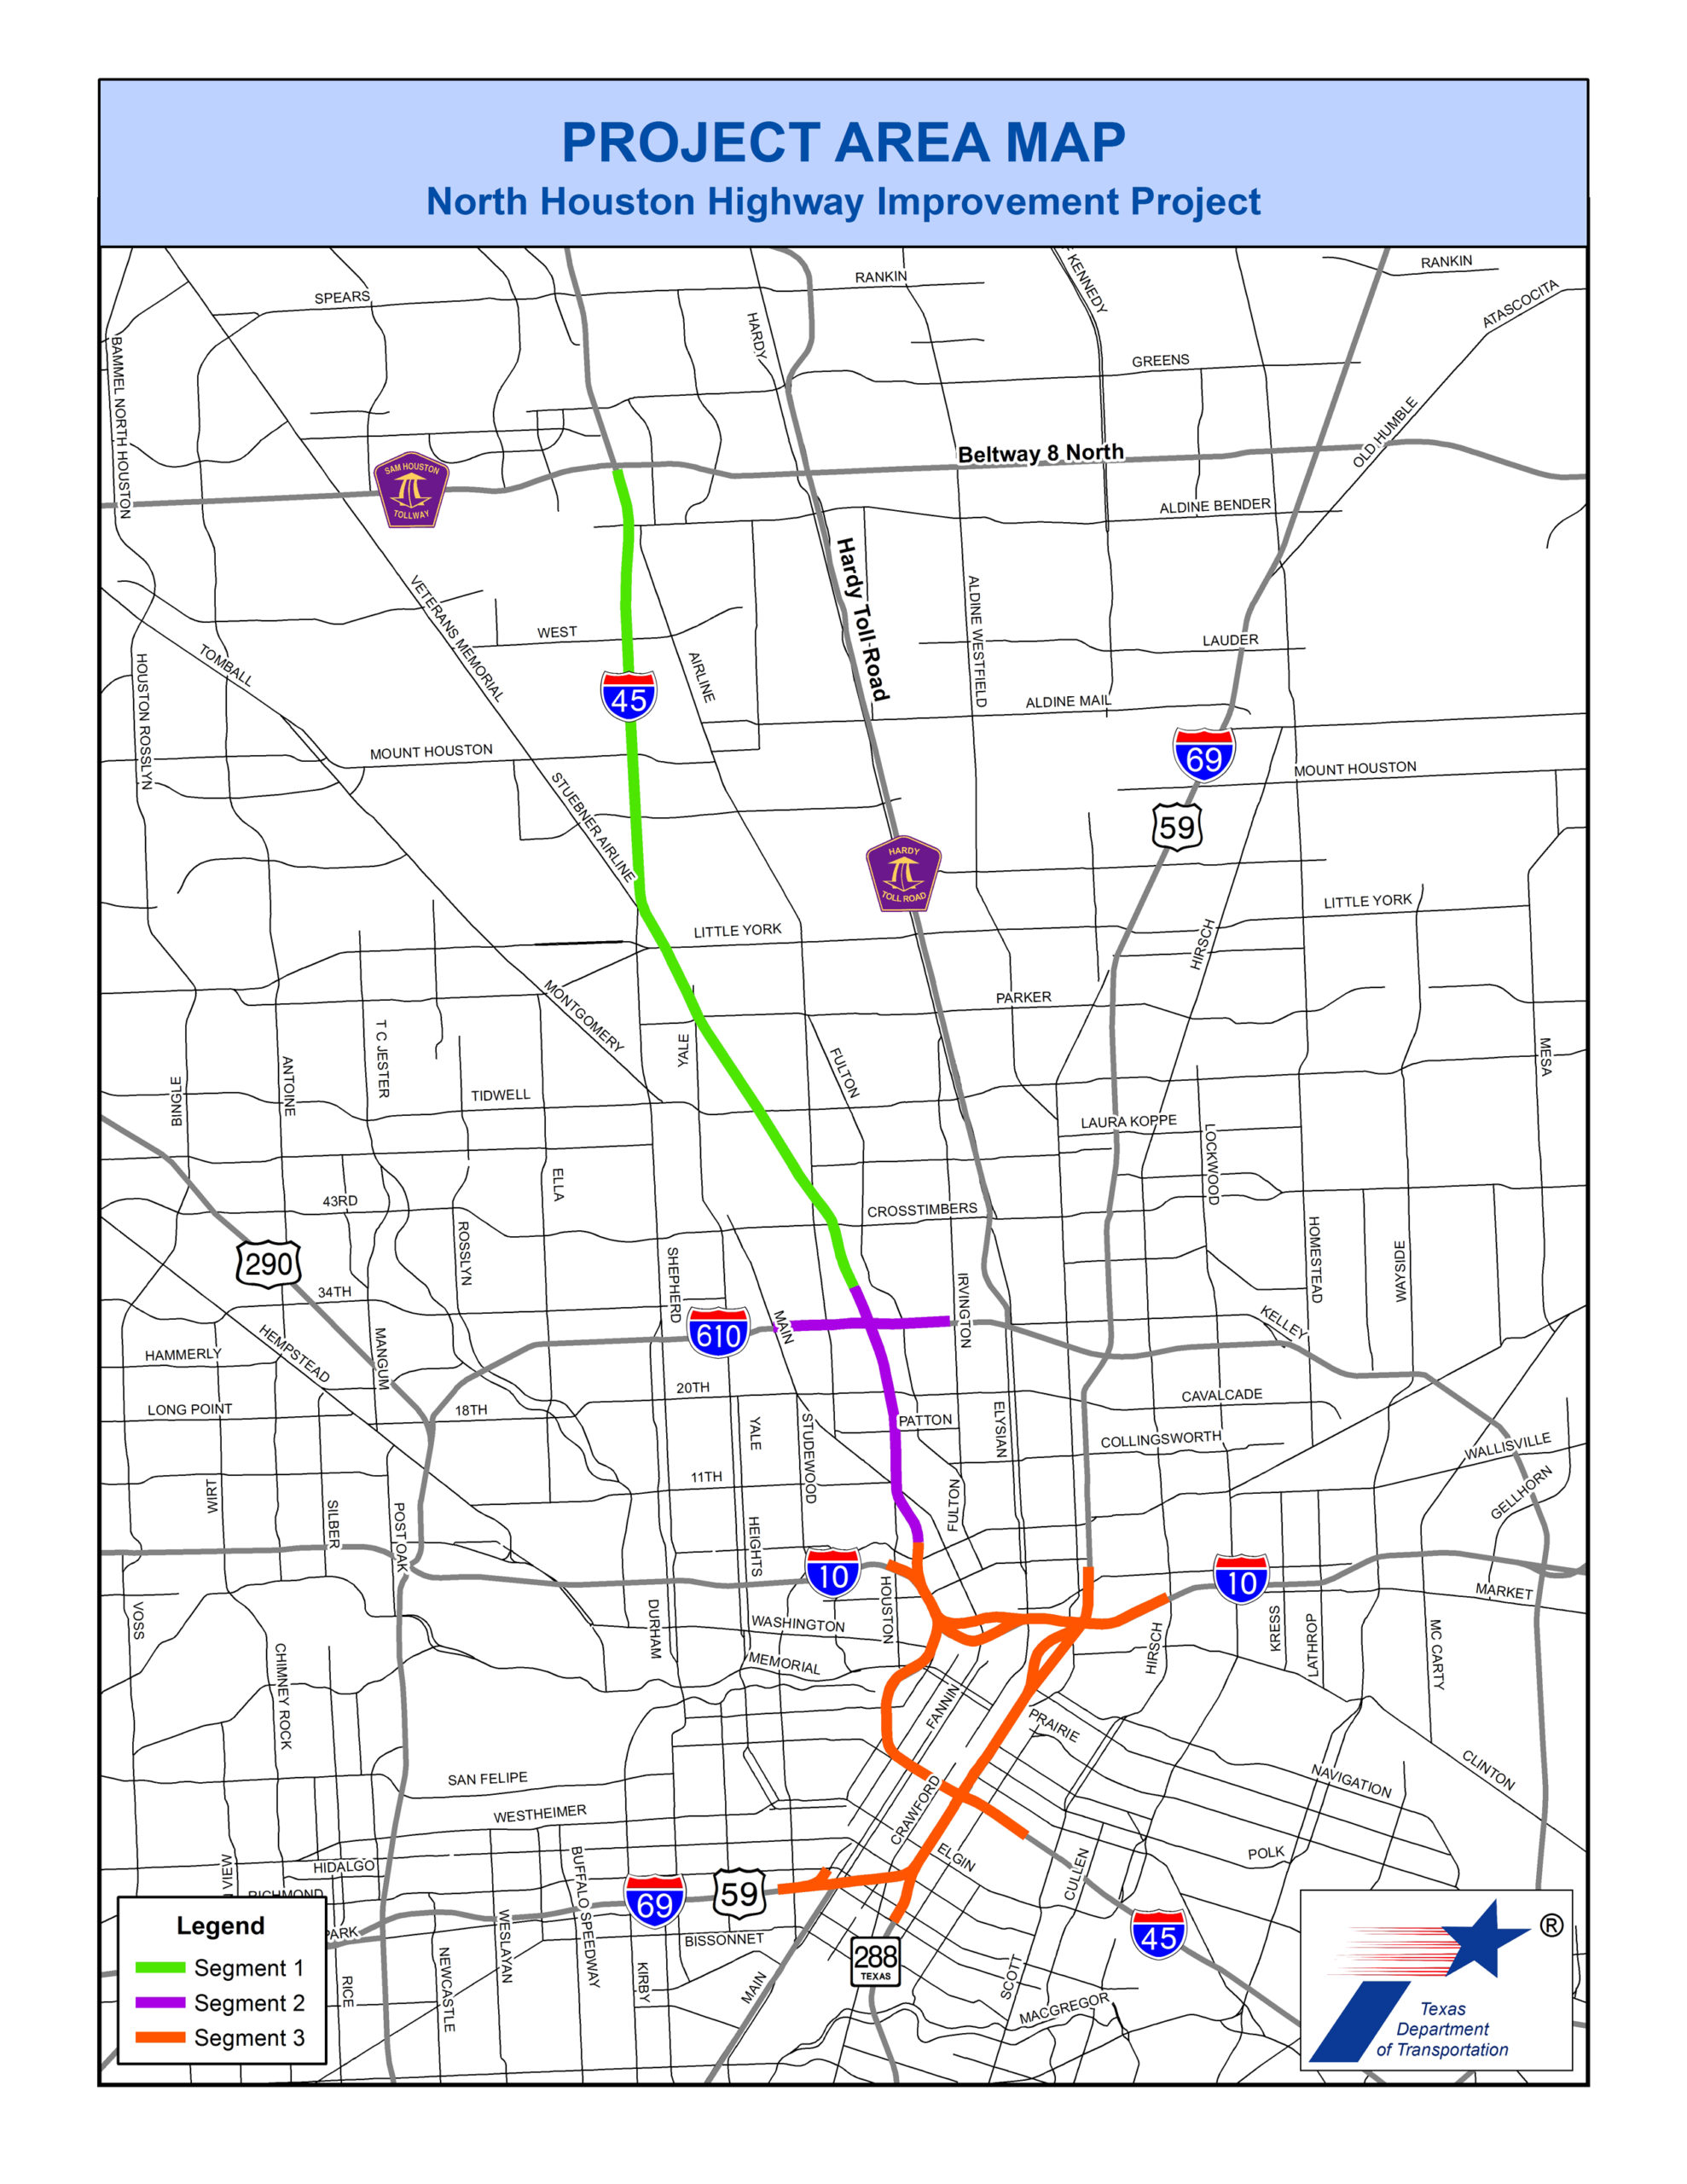 North Houston Highway Improvement Project map